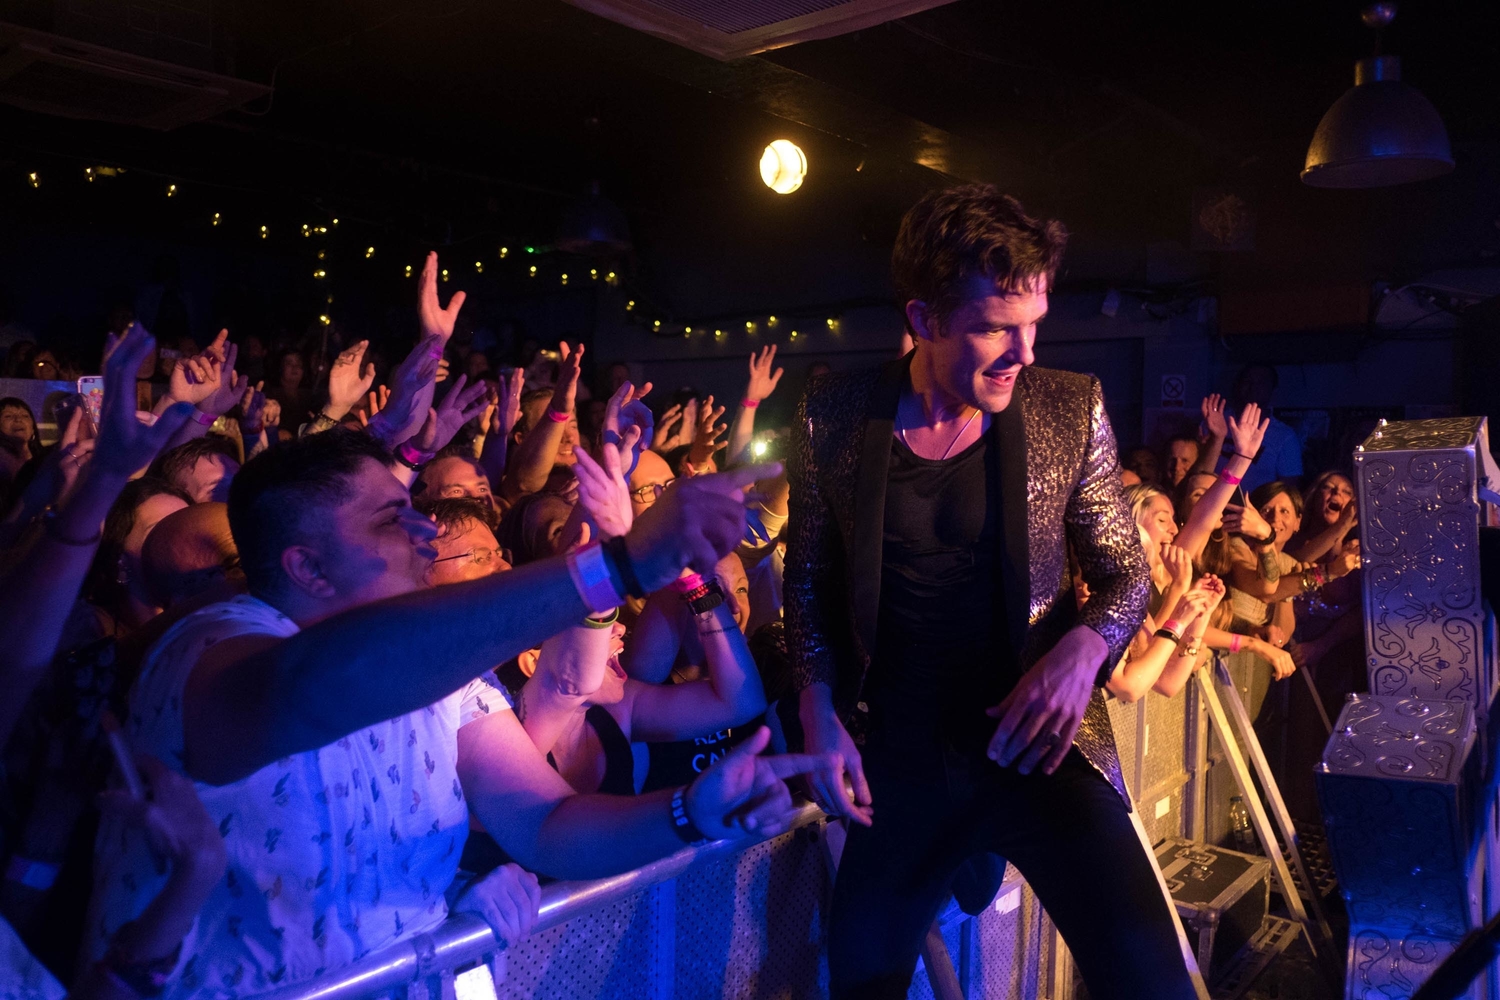 The Killers get sweaty with tiny post-TRNSMT King Tuts gig